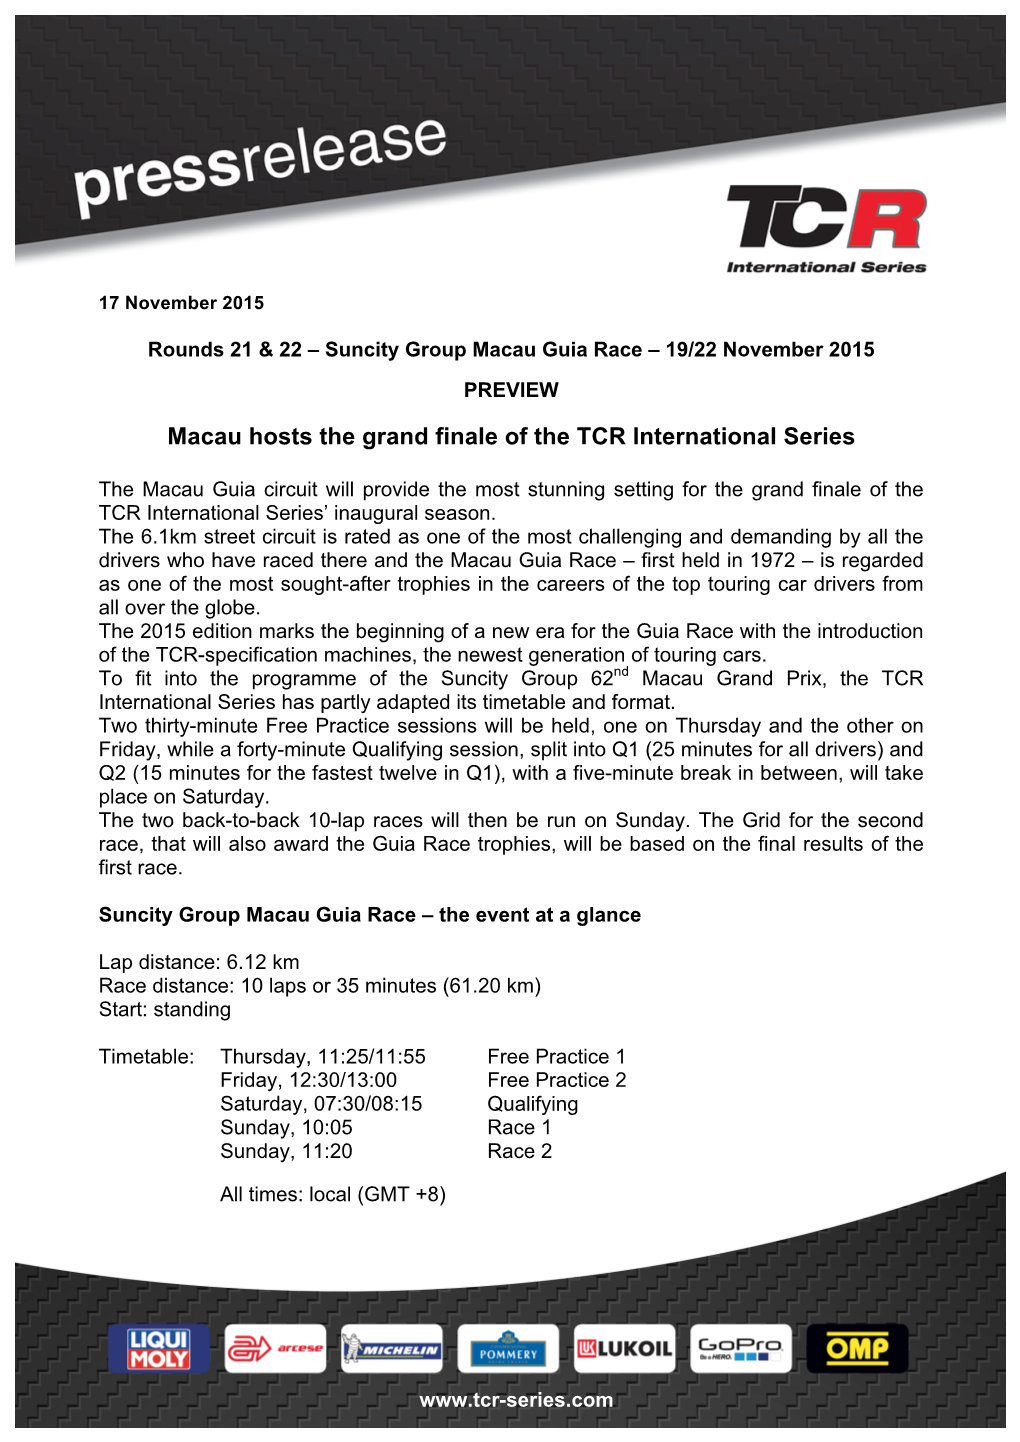 Macau Hosts the Grand Finale of the TCR International Series